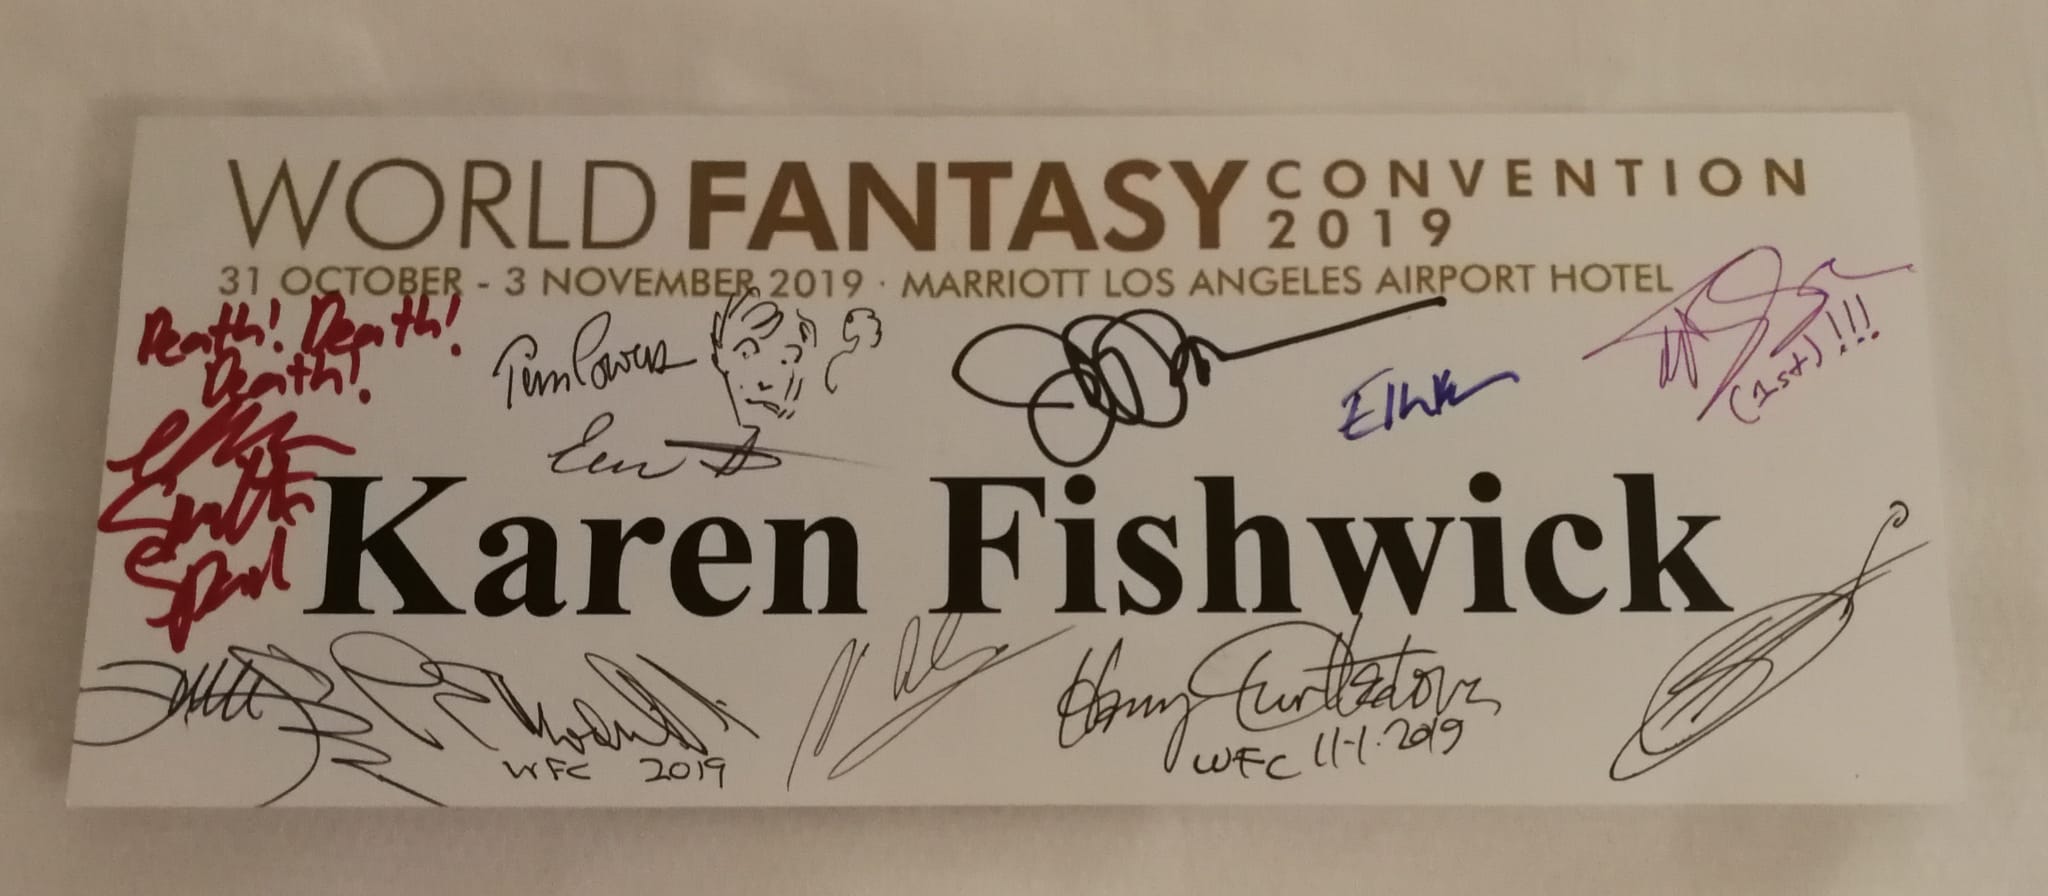 WFC 2019 Nameplate for Karen Fishwick signed by many people.